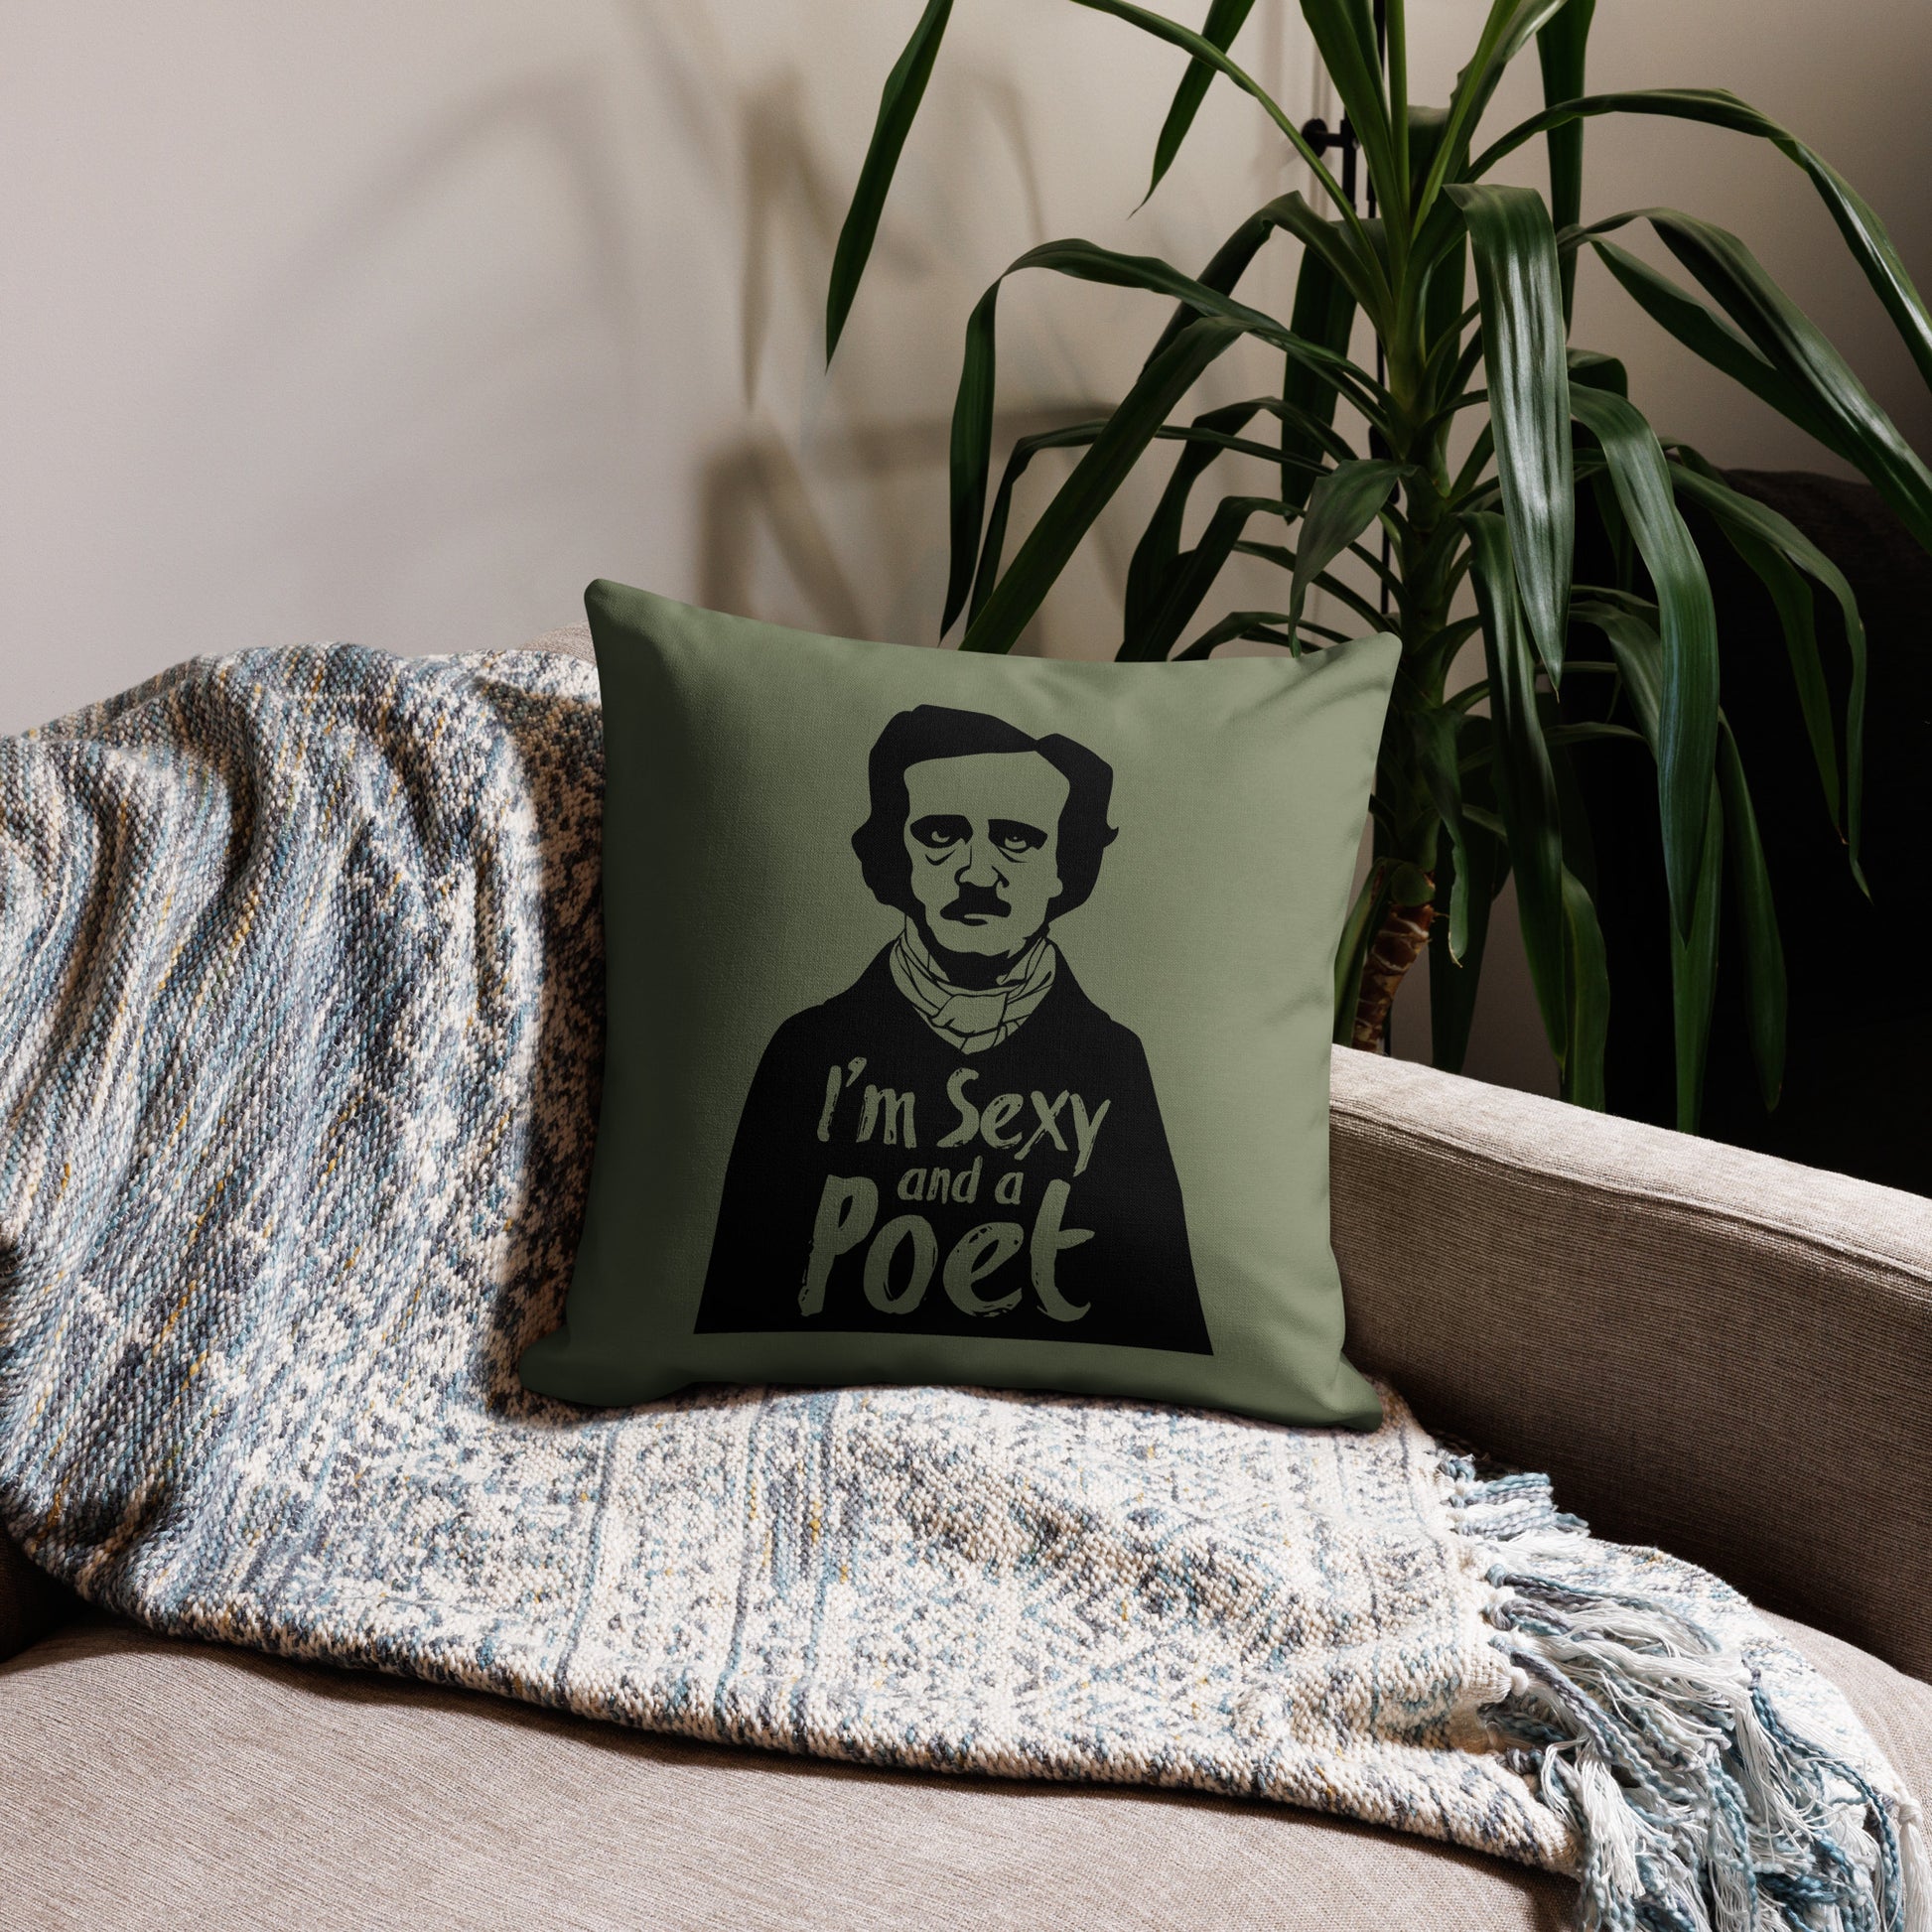 Products Edgar Allan Poe "I'm Sexy and a Poet" Premium Pillow - Green 18 x 18